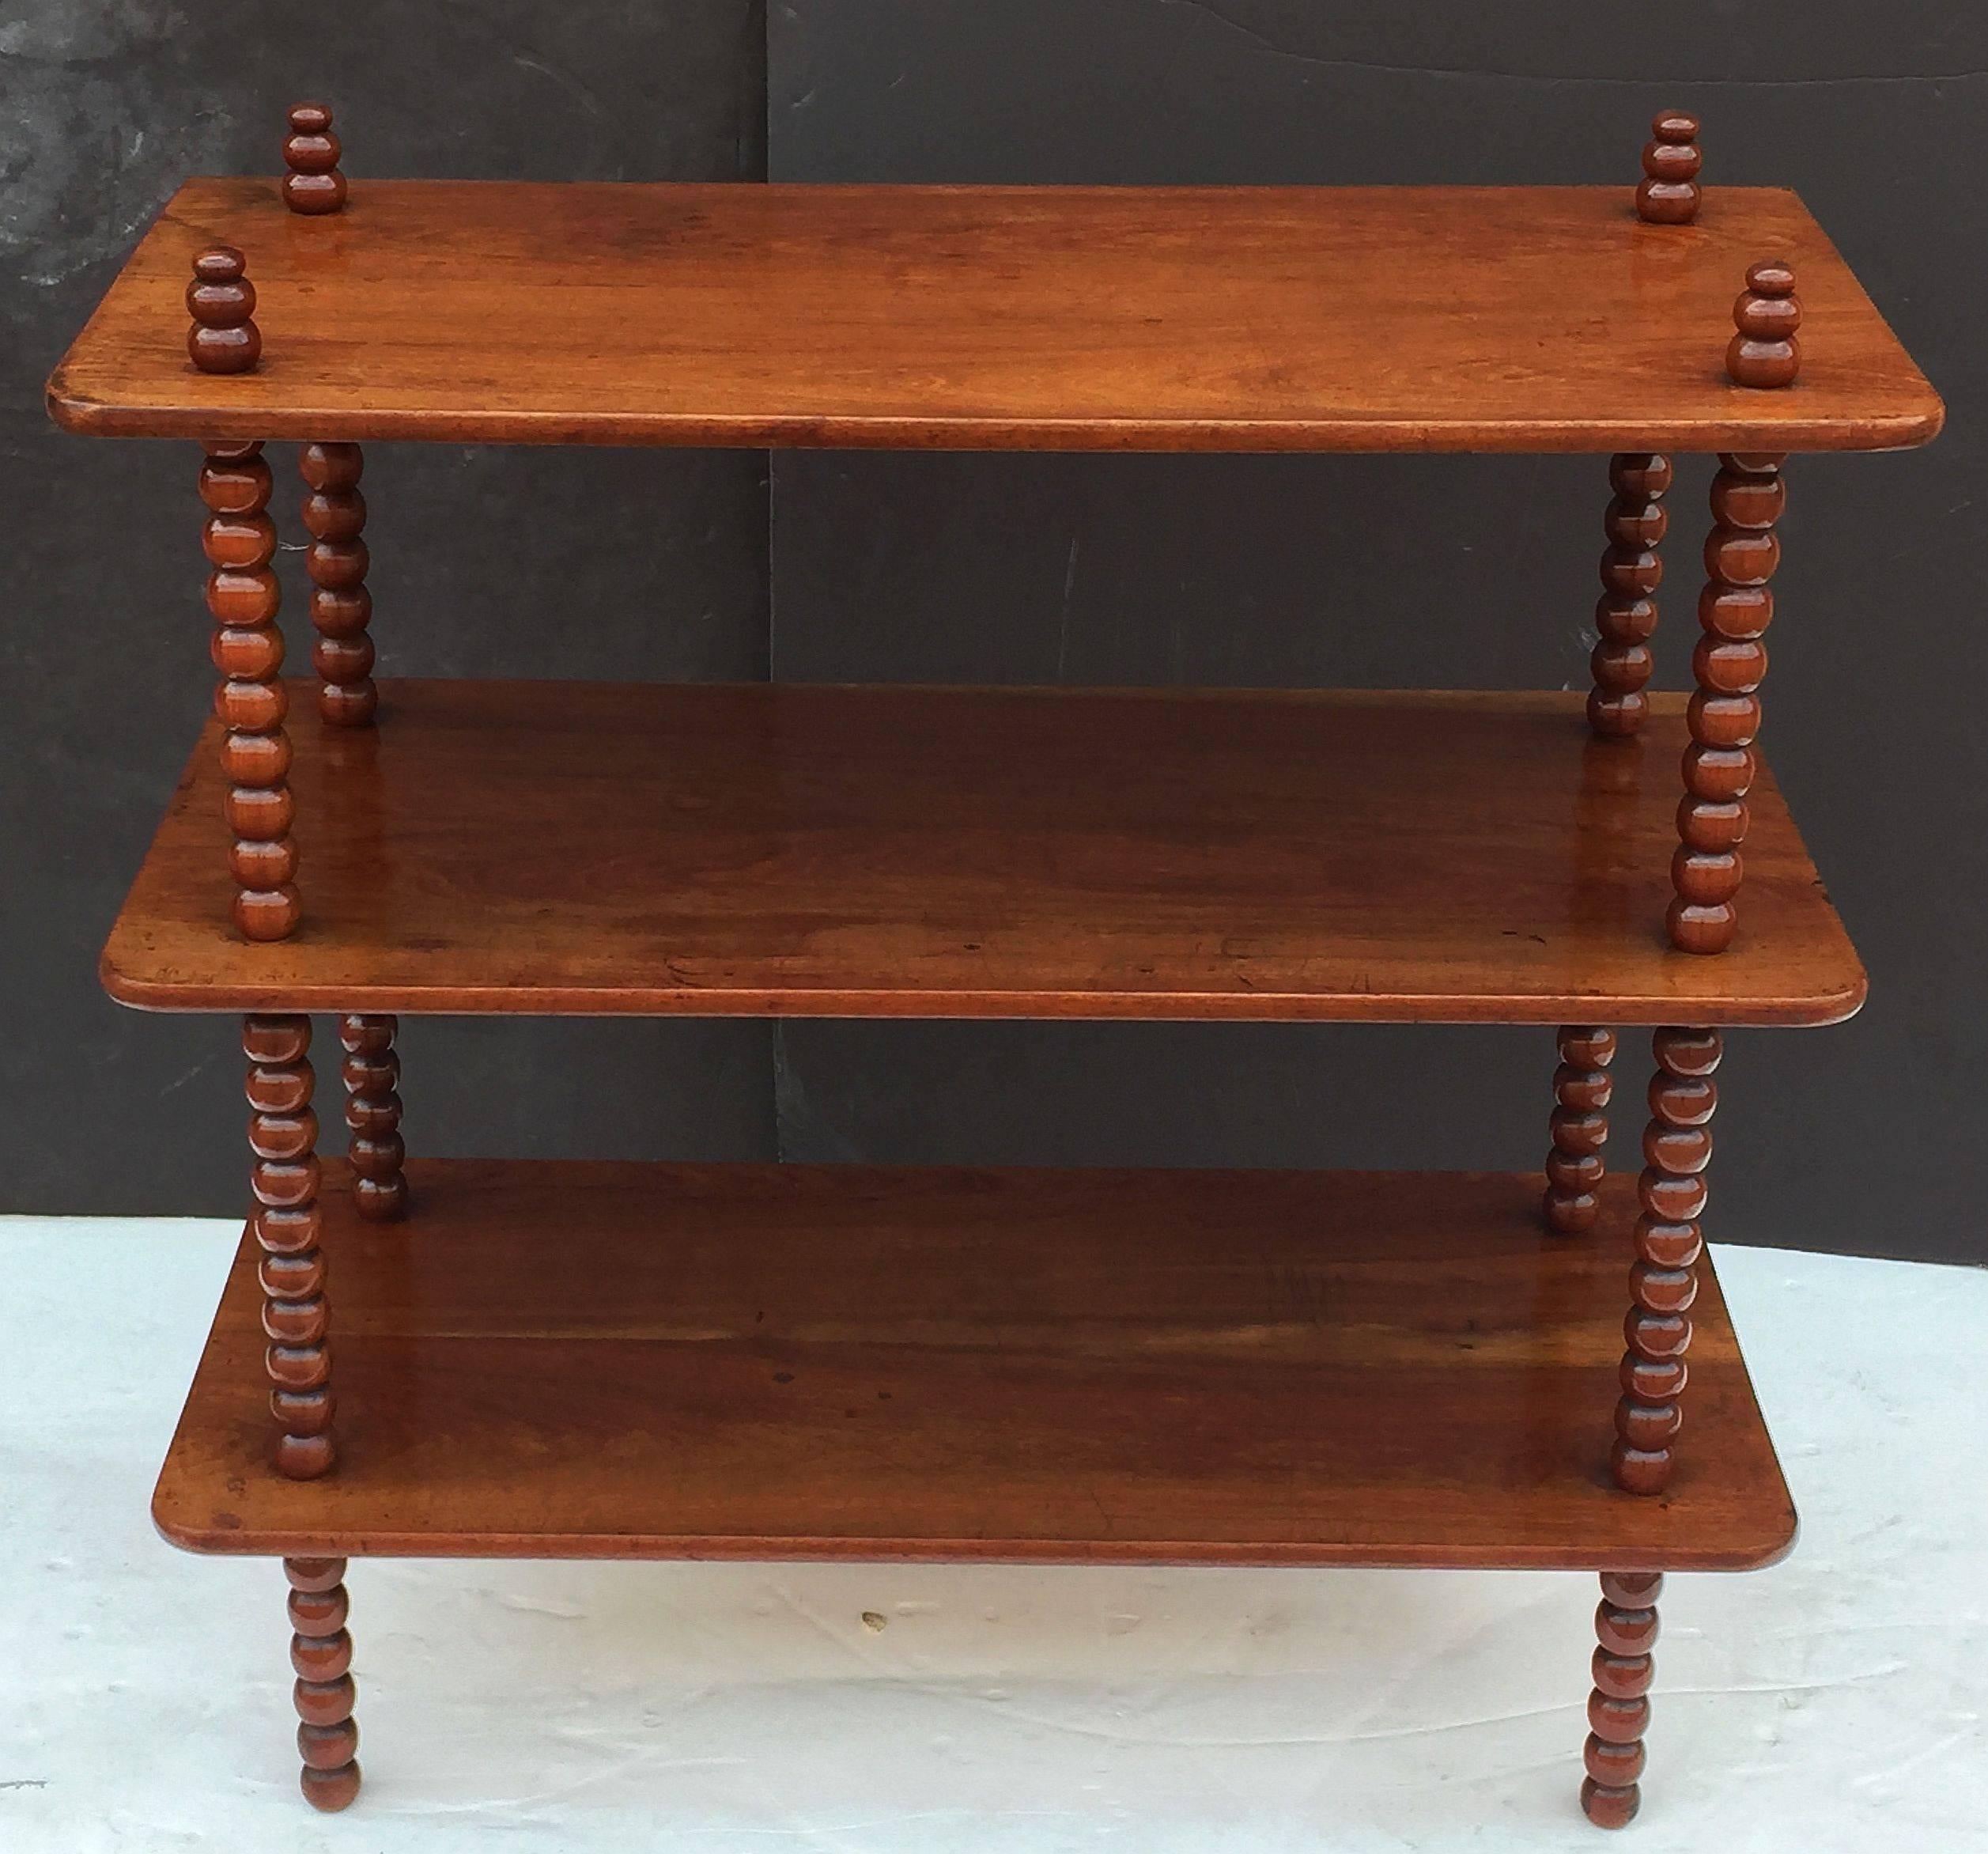 A fine English rectangular console or buffet with three tiers or shelves and four bobbin turned supports of mahogany.